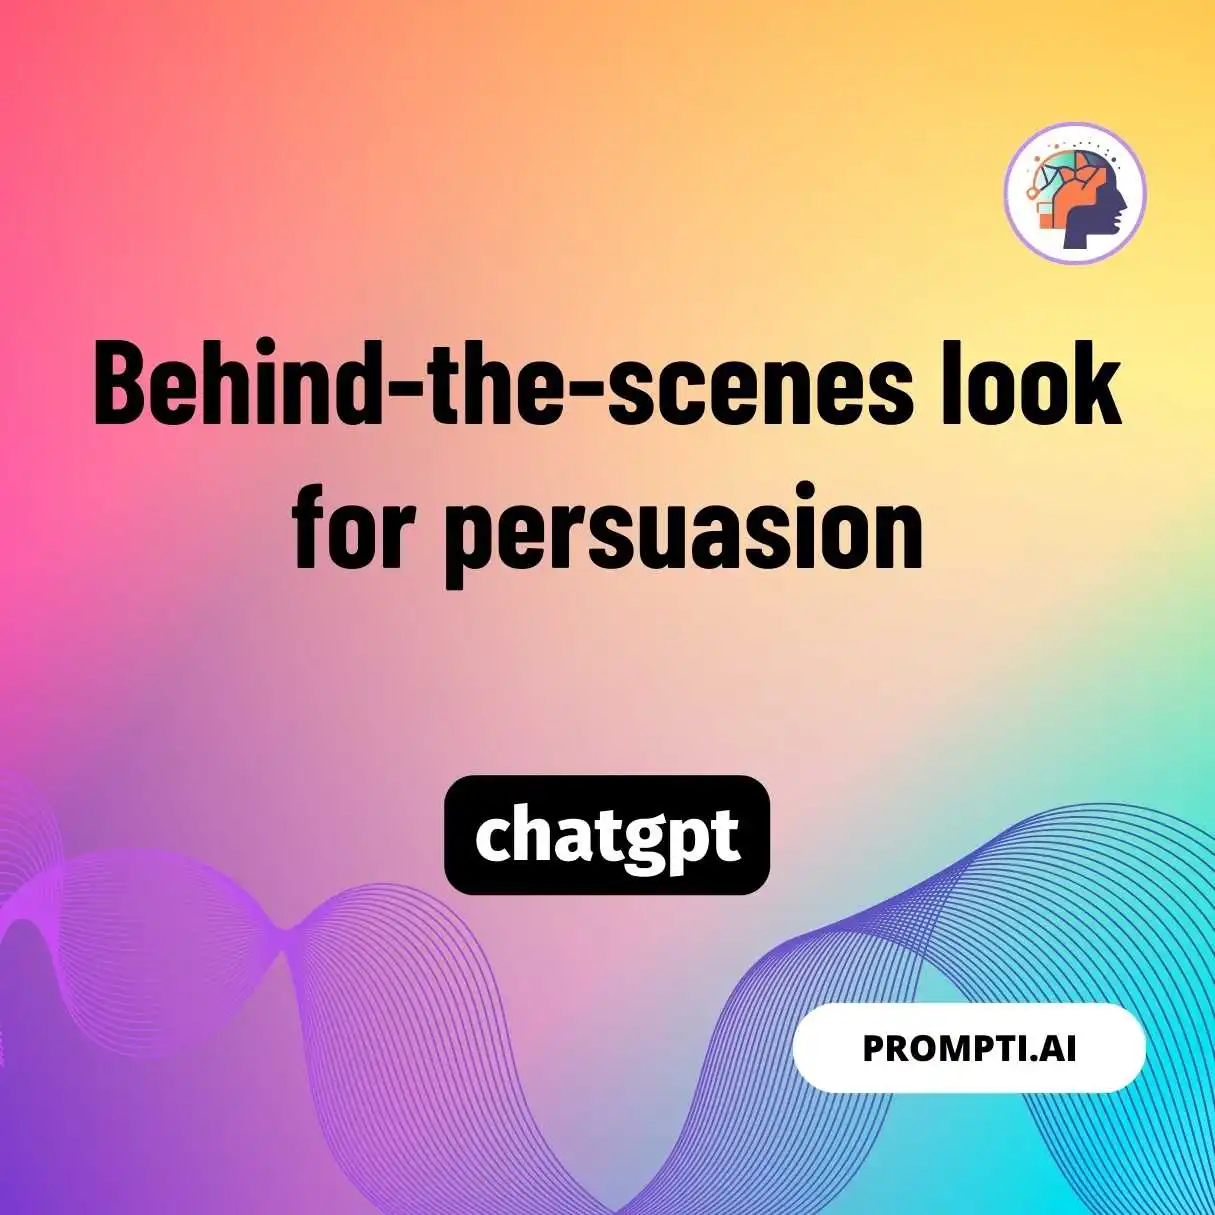 Behind-the-scenes look for persuasion